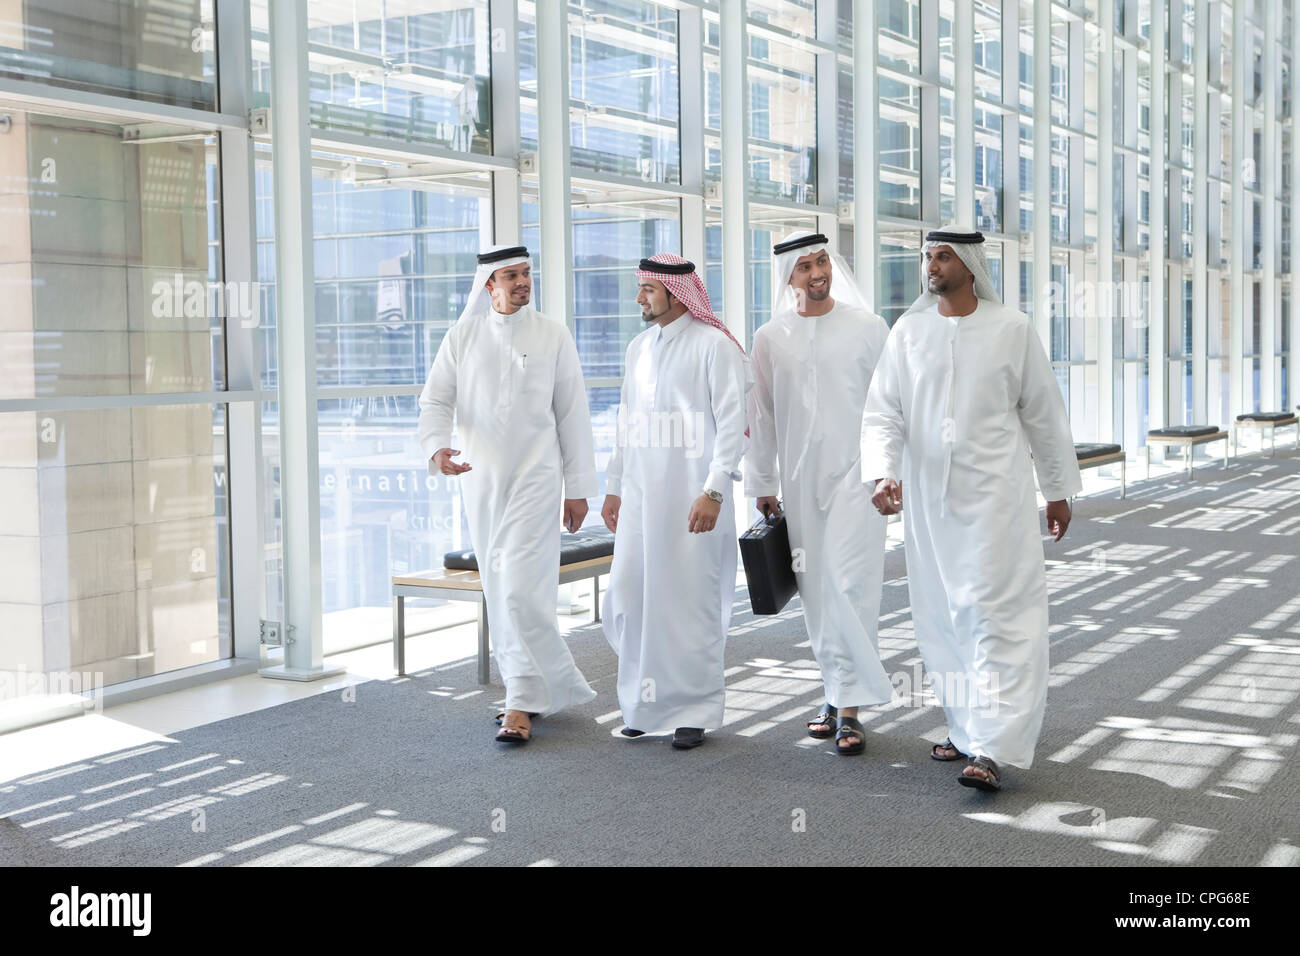 Arab Men High Resolution Stock Photography and Images - Alamy